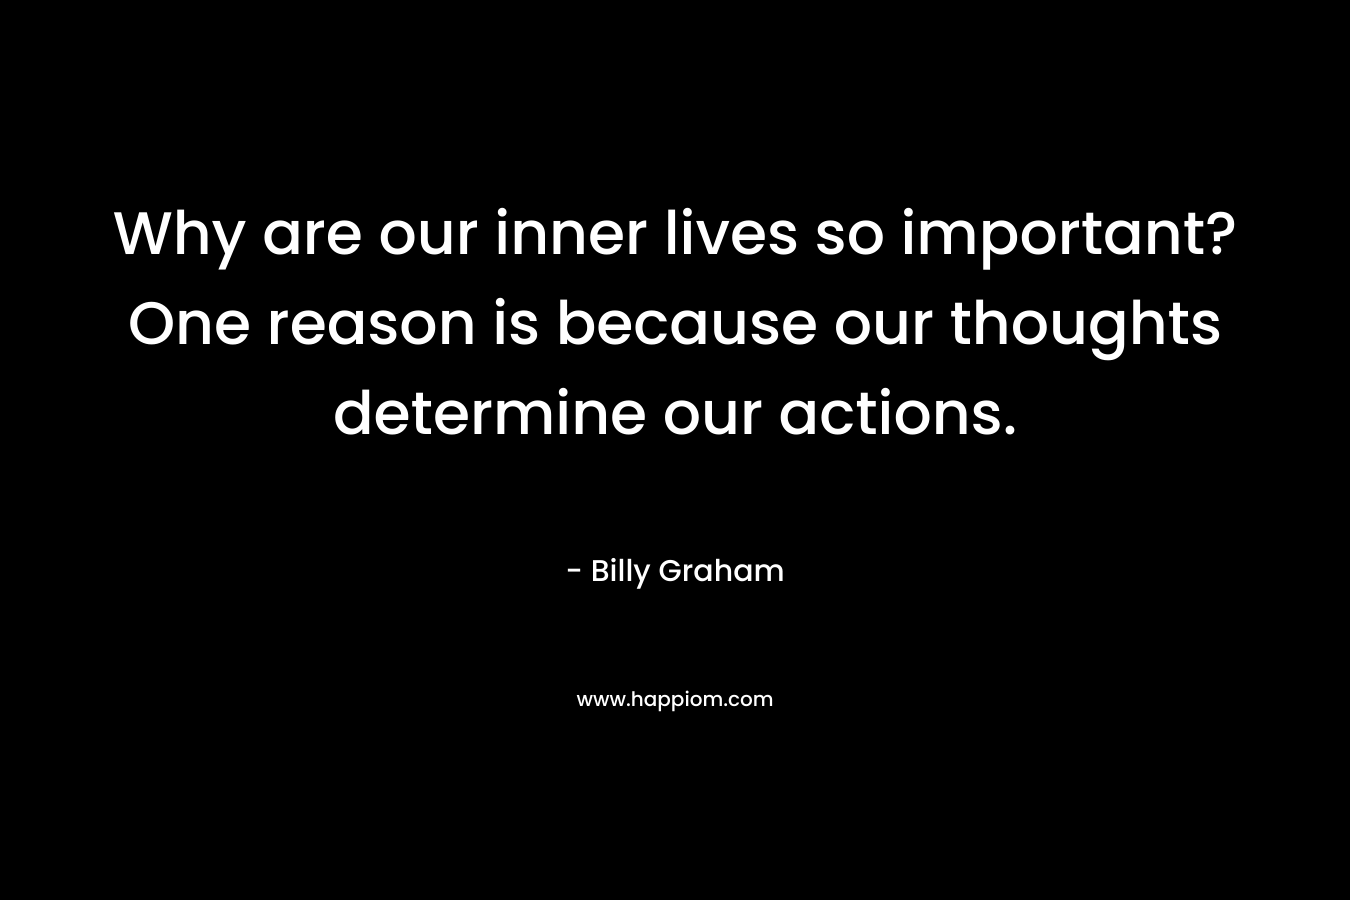 Why are our inner lives so important? One reason is because our thoughts determine our actions.